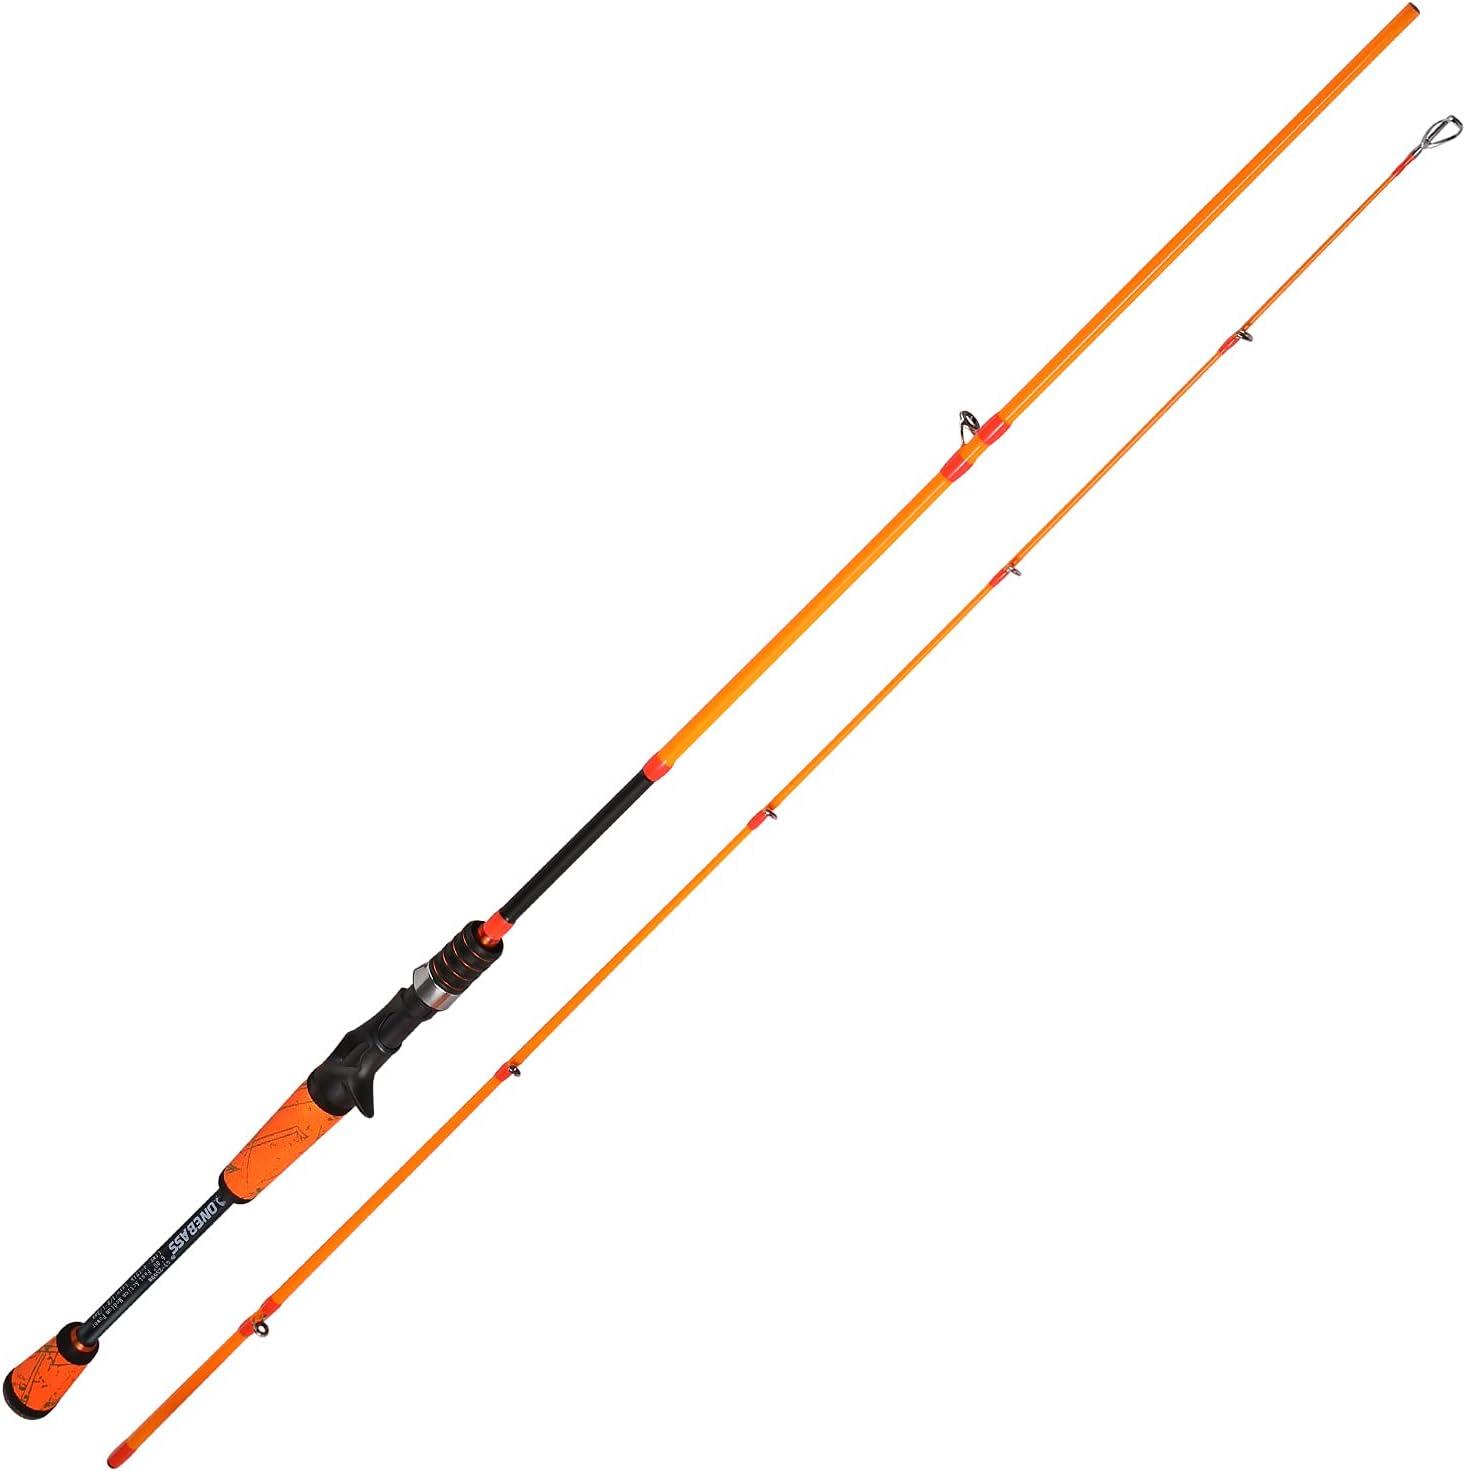 One Bass Fishing Pole 24 Ton Carbon Fiber Casting and Spinning Rods - Two  Pieces, SuperPolymer Handle Fishing Rod for Bass Fishing B-Orange-Cast Cast- 6'6Medium-2piece